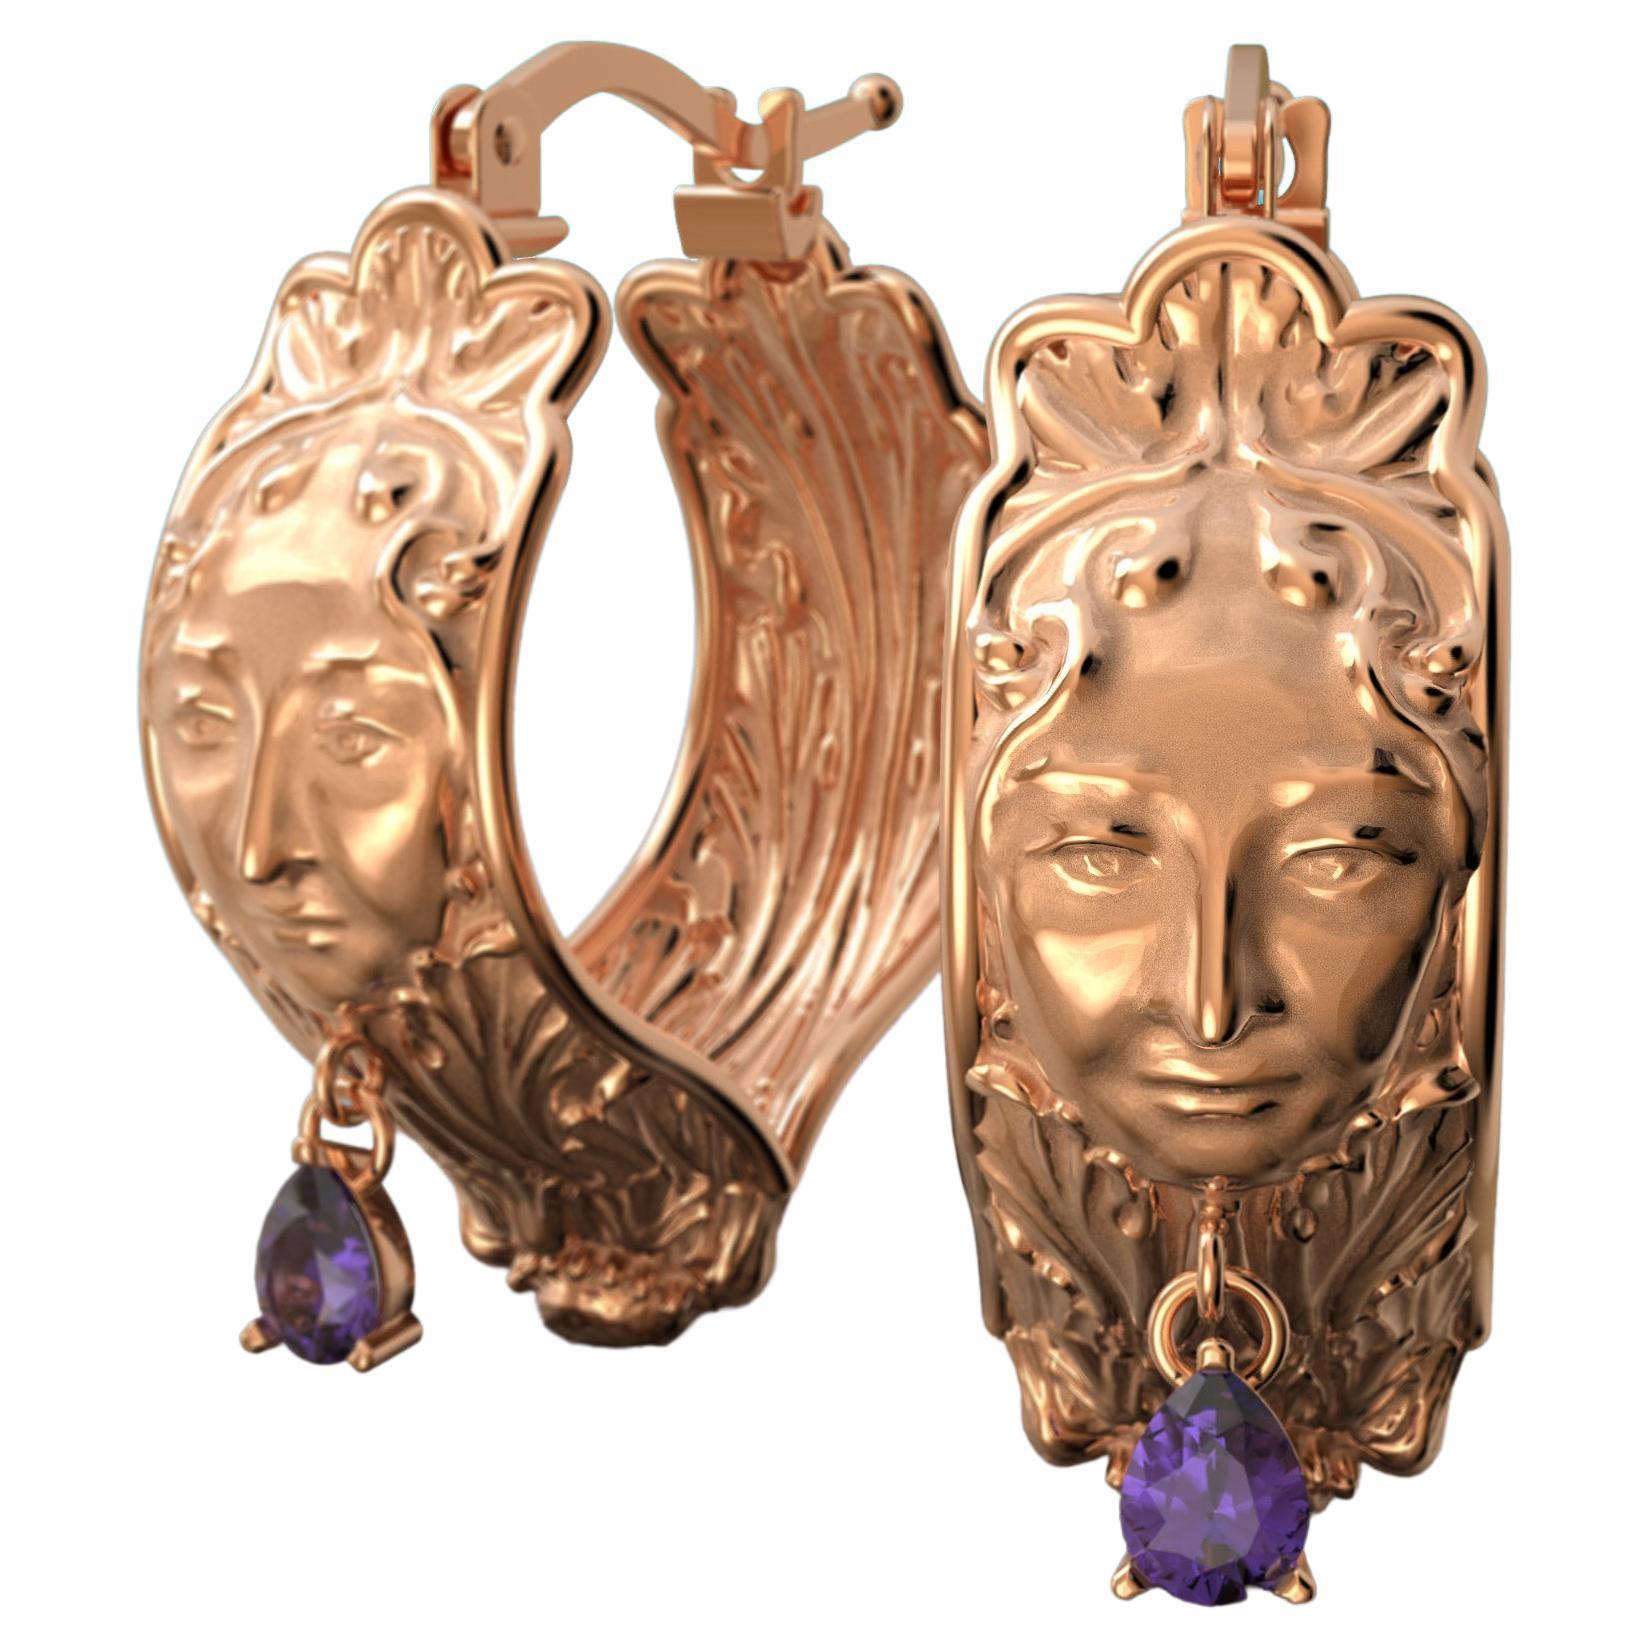 Hoop Earrings in 14k with Amethysts Made in Italy by Oltremare Gioielli